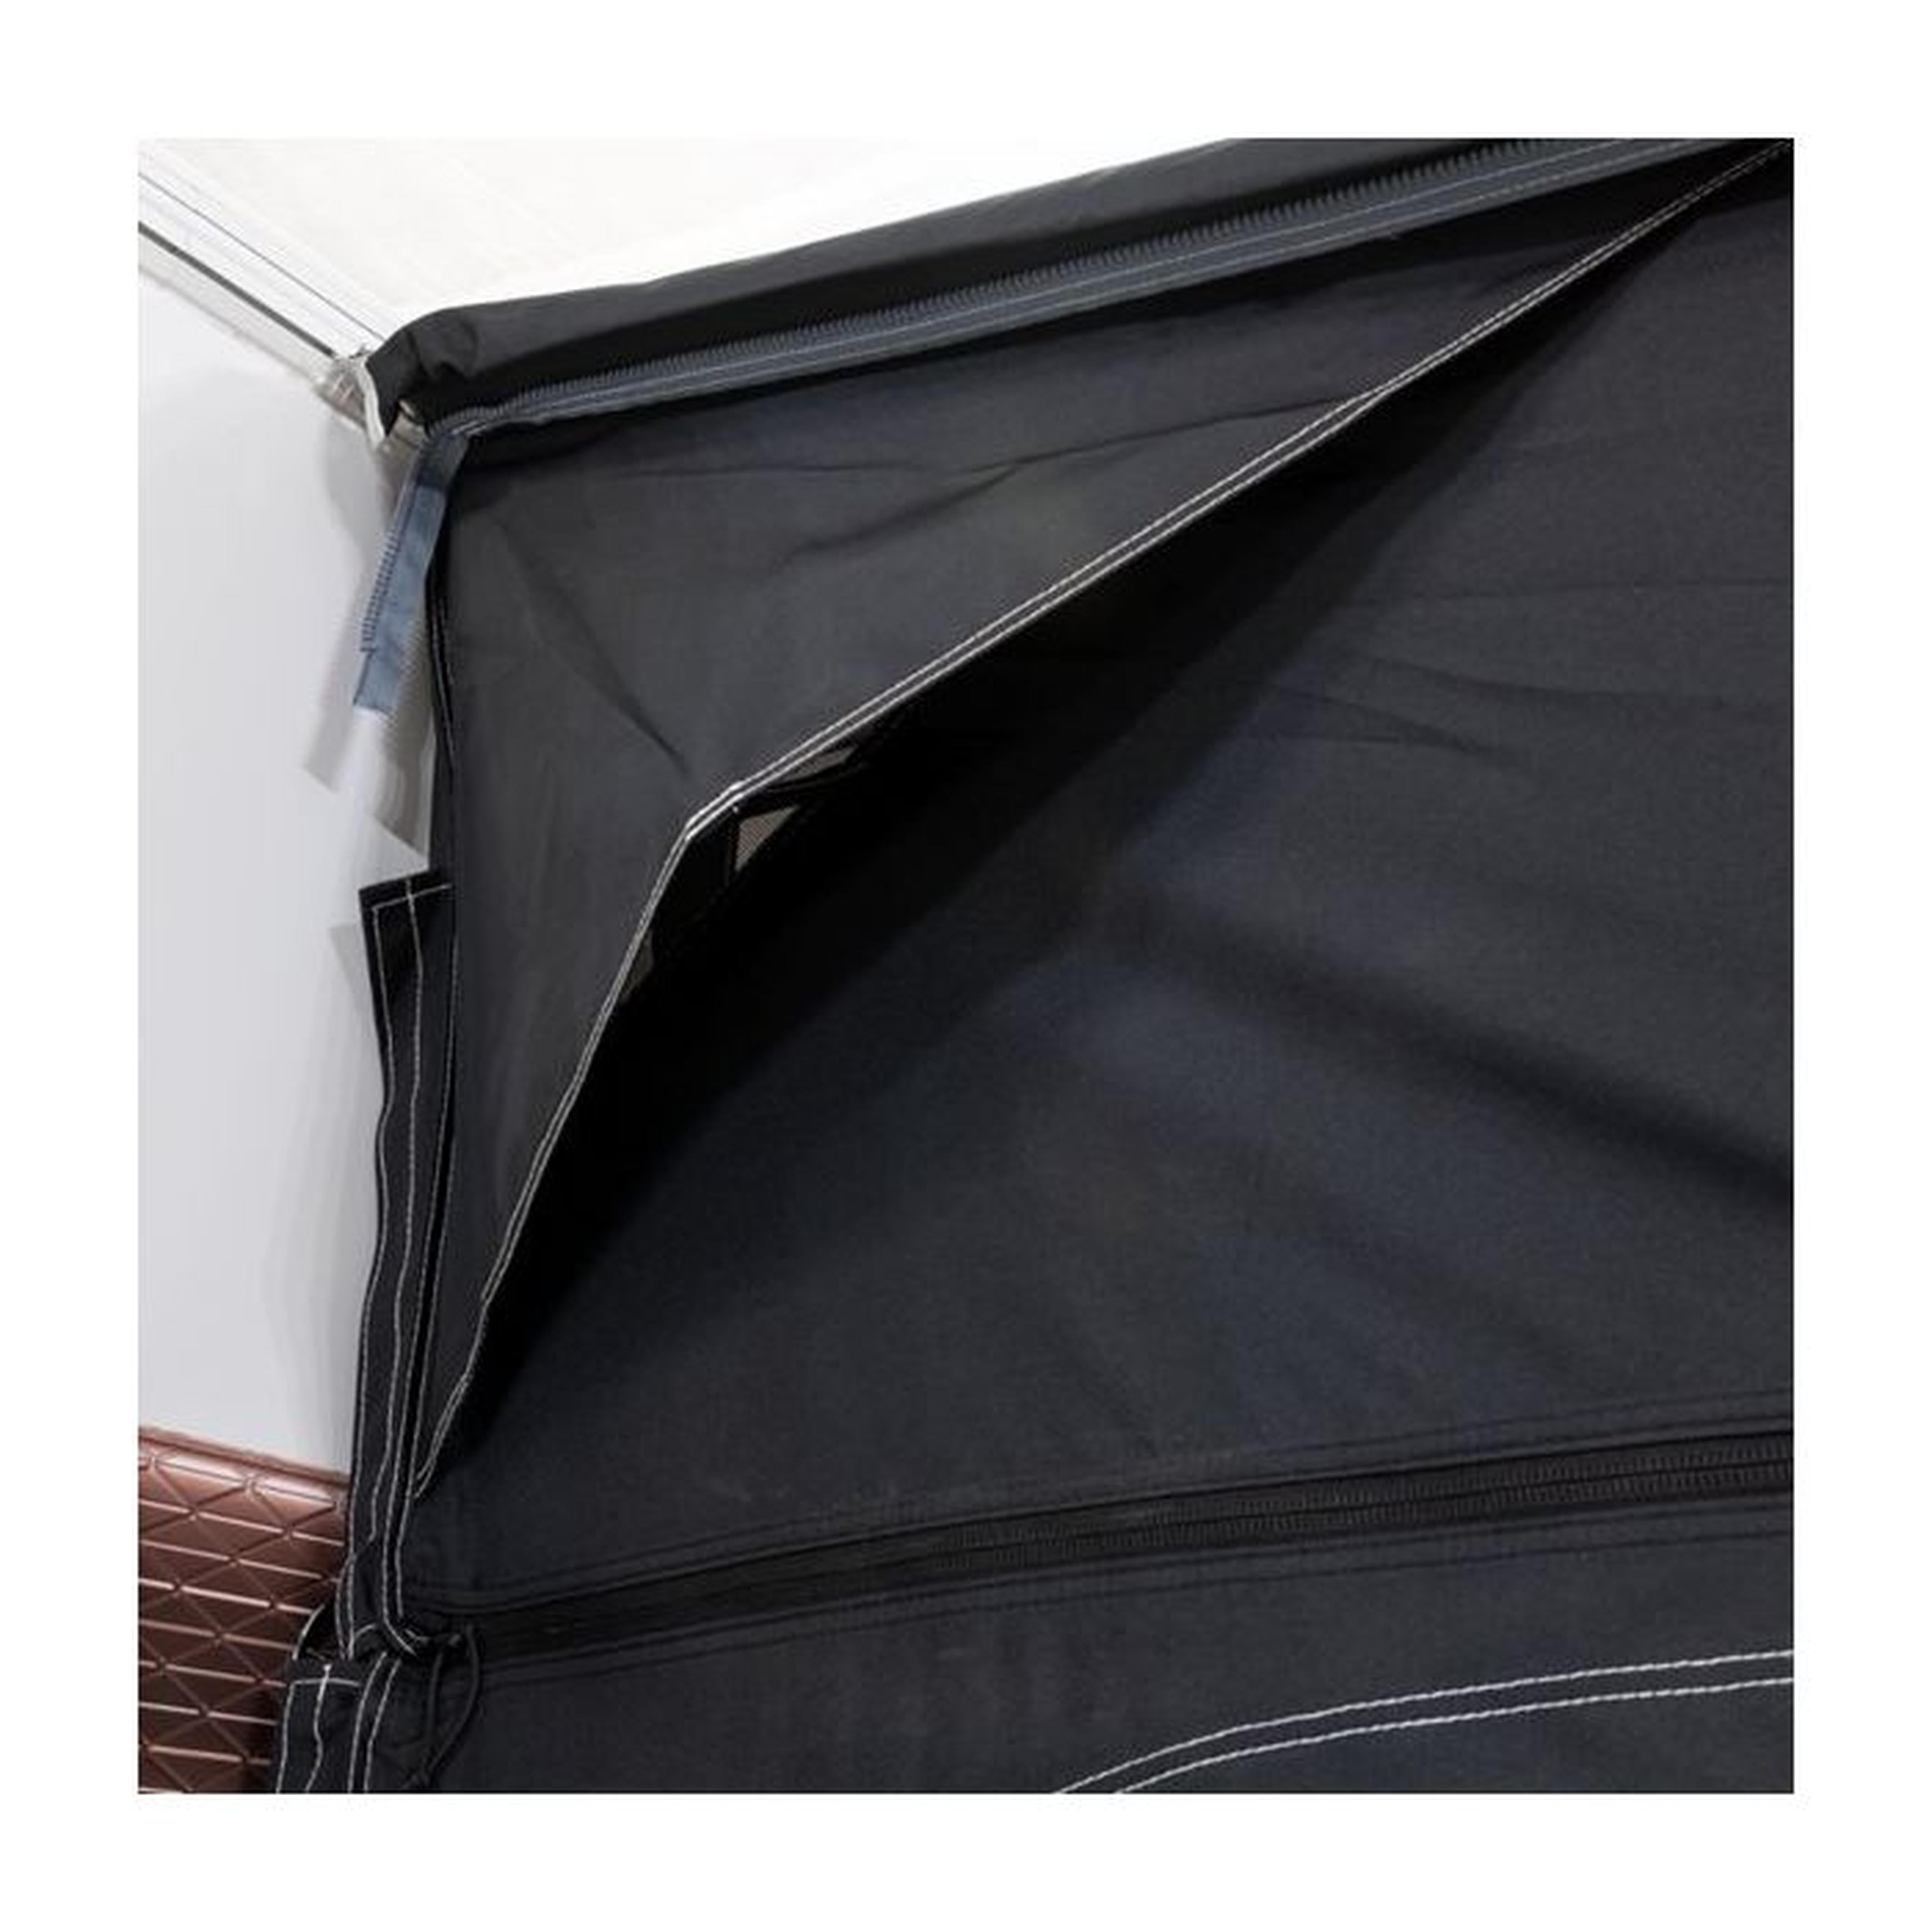 Dometic Club Air Pro 330 S Awning 2023 Model